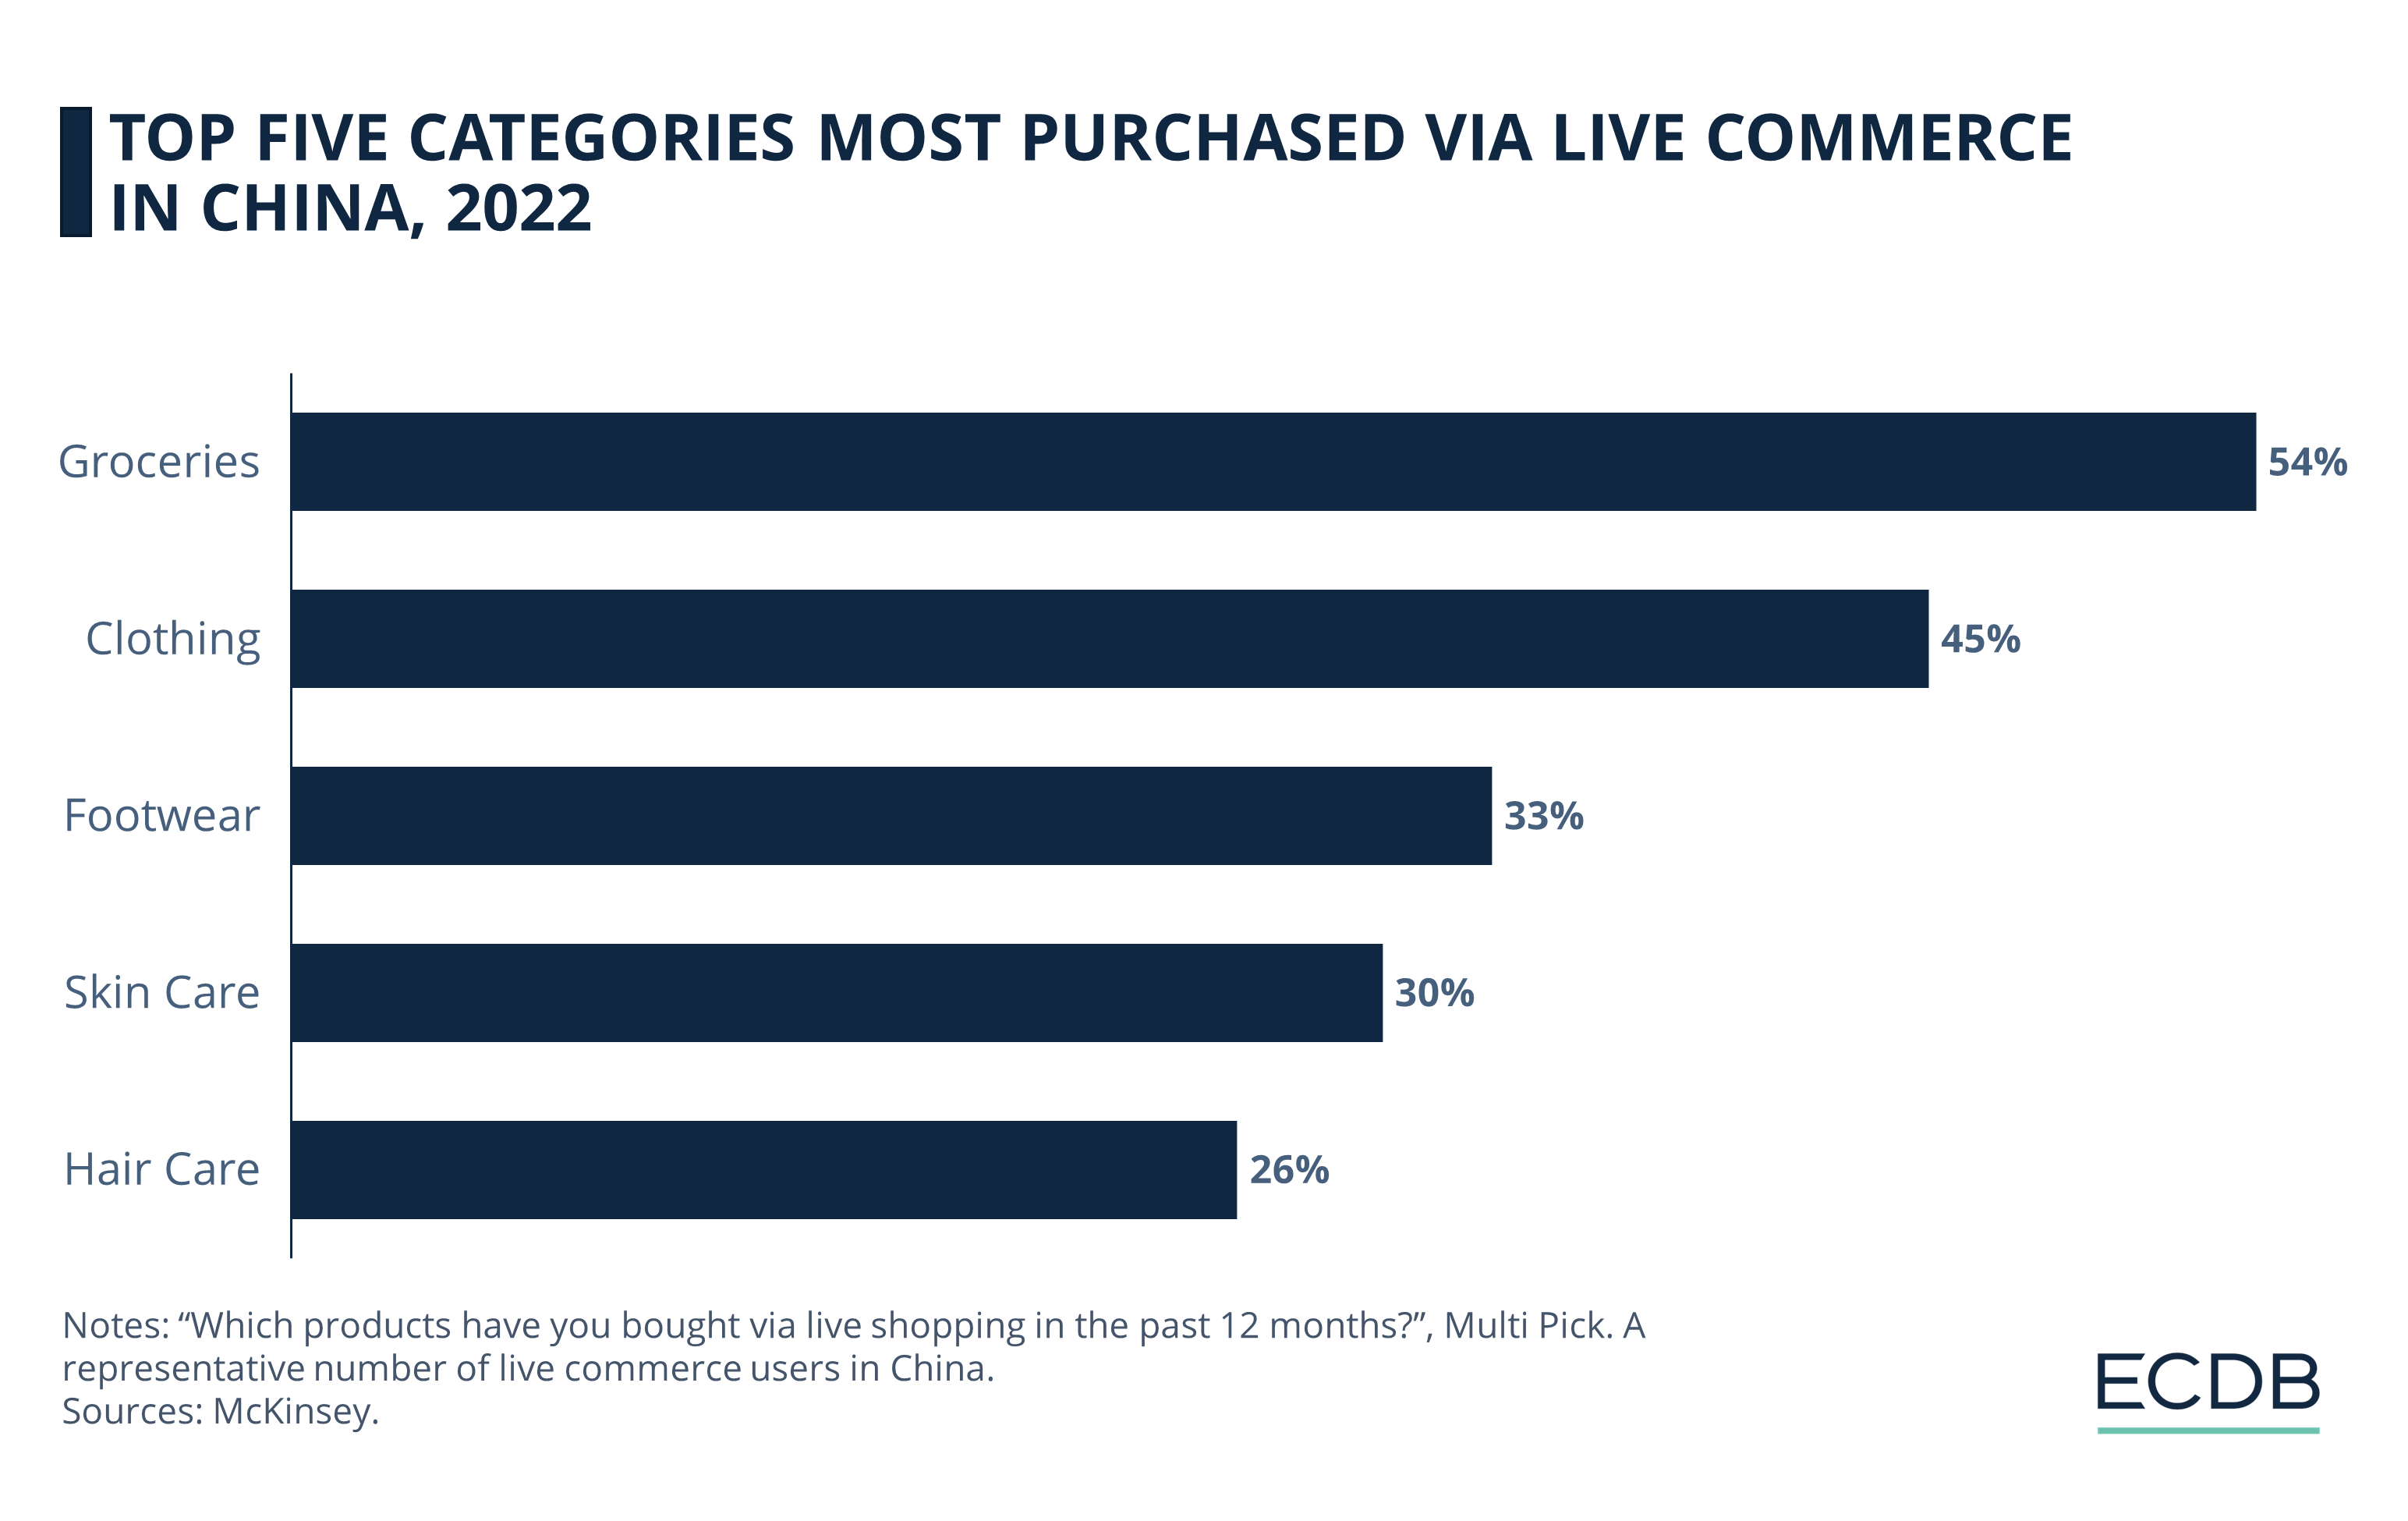 Top Five Categories Most Purchased via Live Commerce in China, 2022